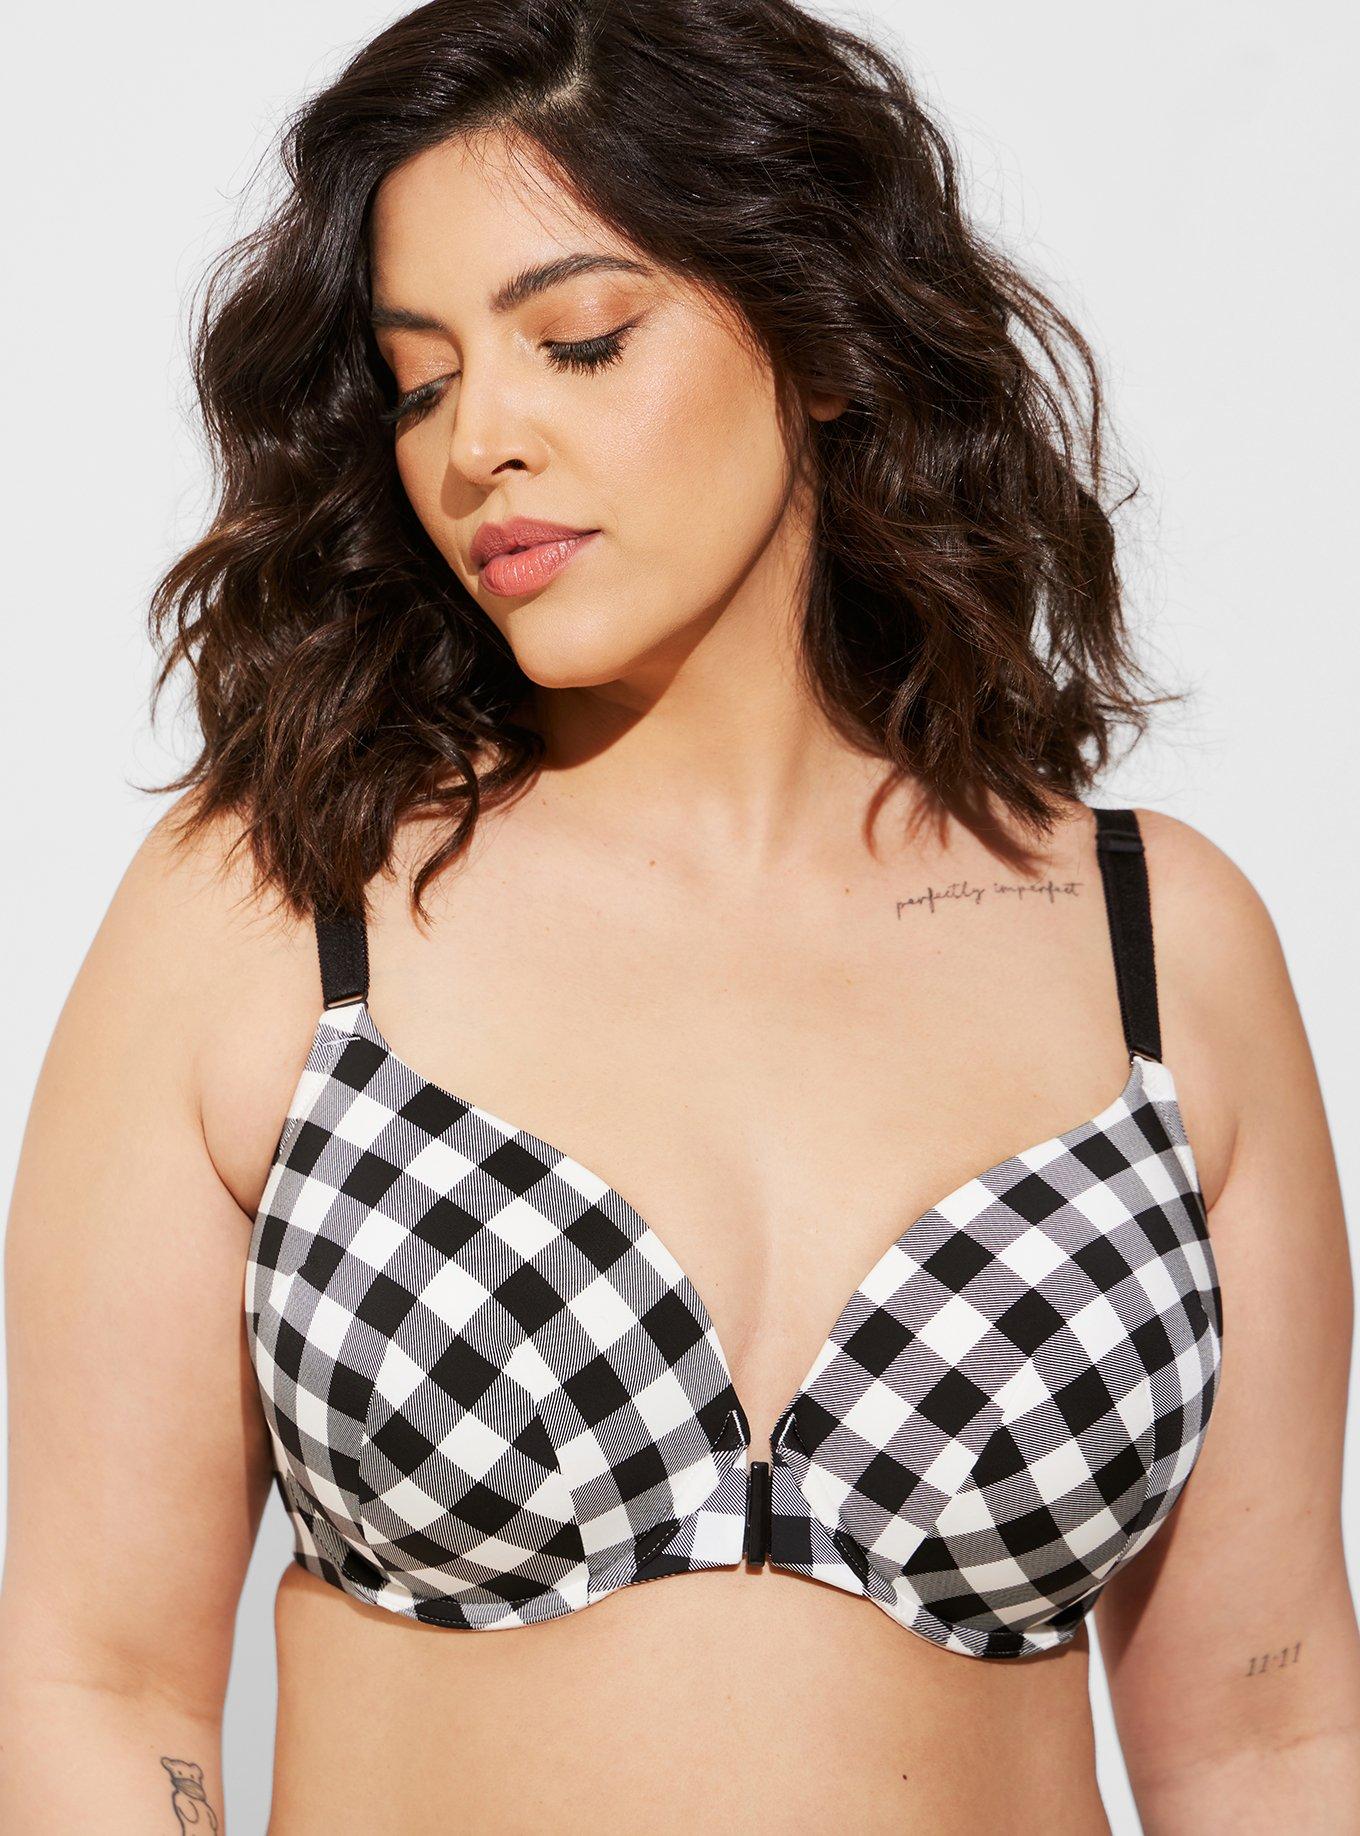 Torrid can't even have right sizes for their model photos, this bra doesn't  even looks like it fits : r/PlusSizeFashion